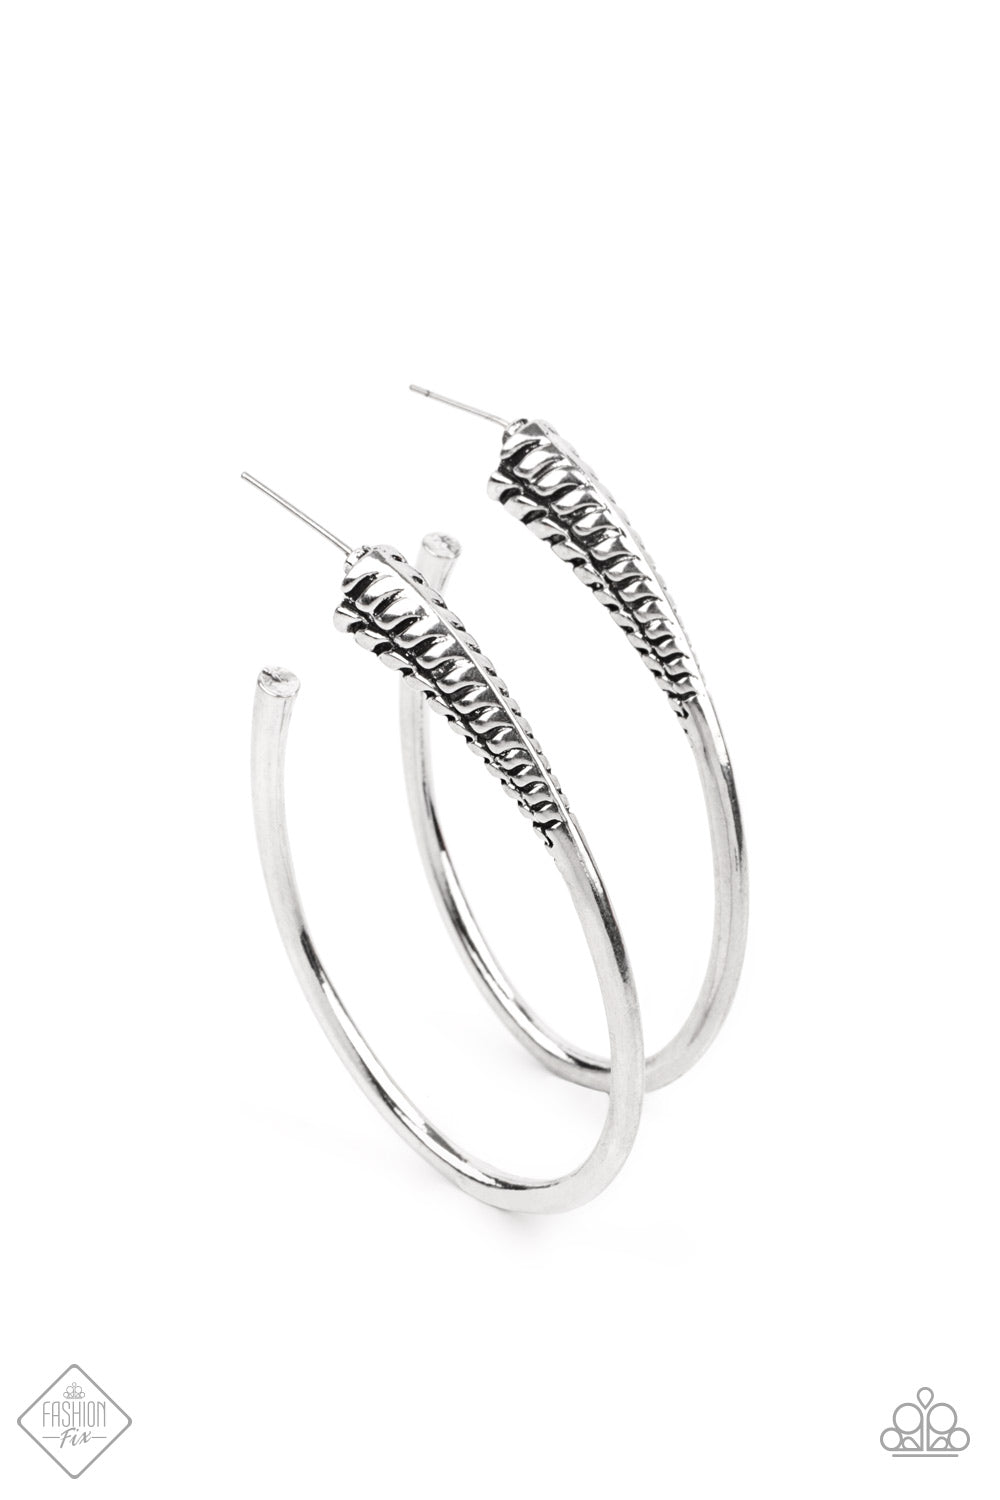 Paparazzi Fully Loaded Silver Post Hoop Earrings - Fashion Fix Magnificent Musings April 2021